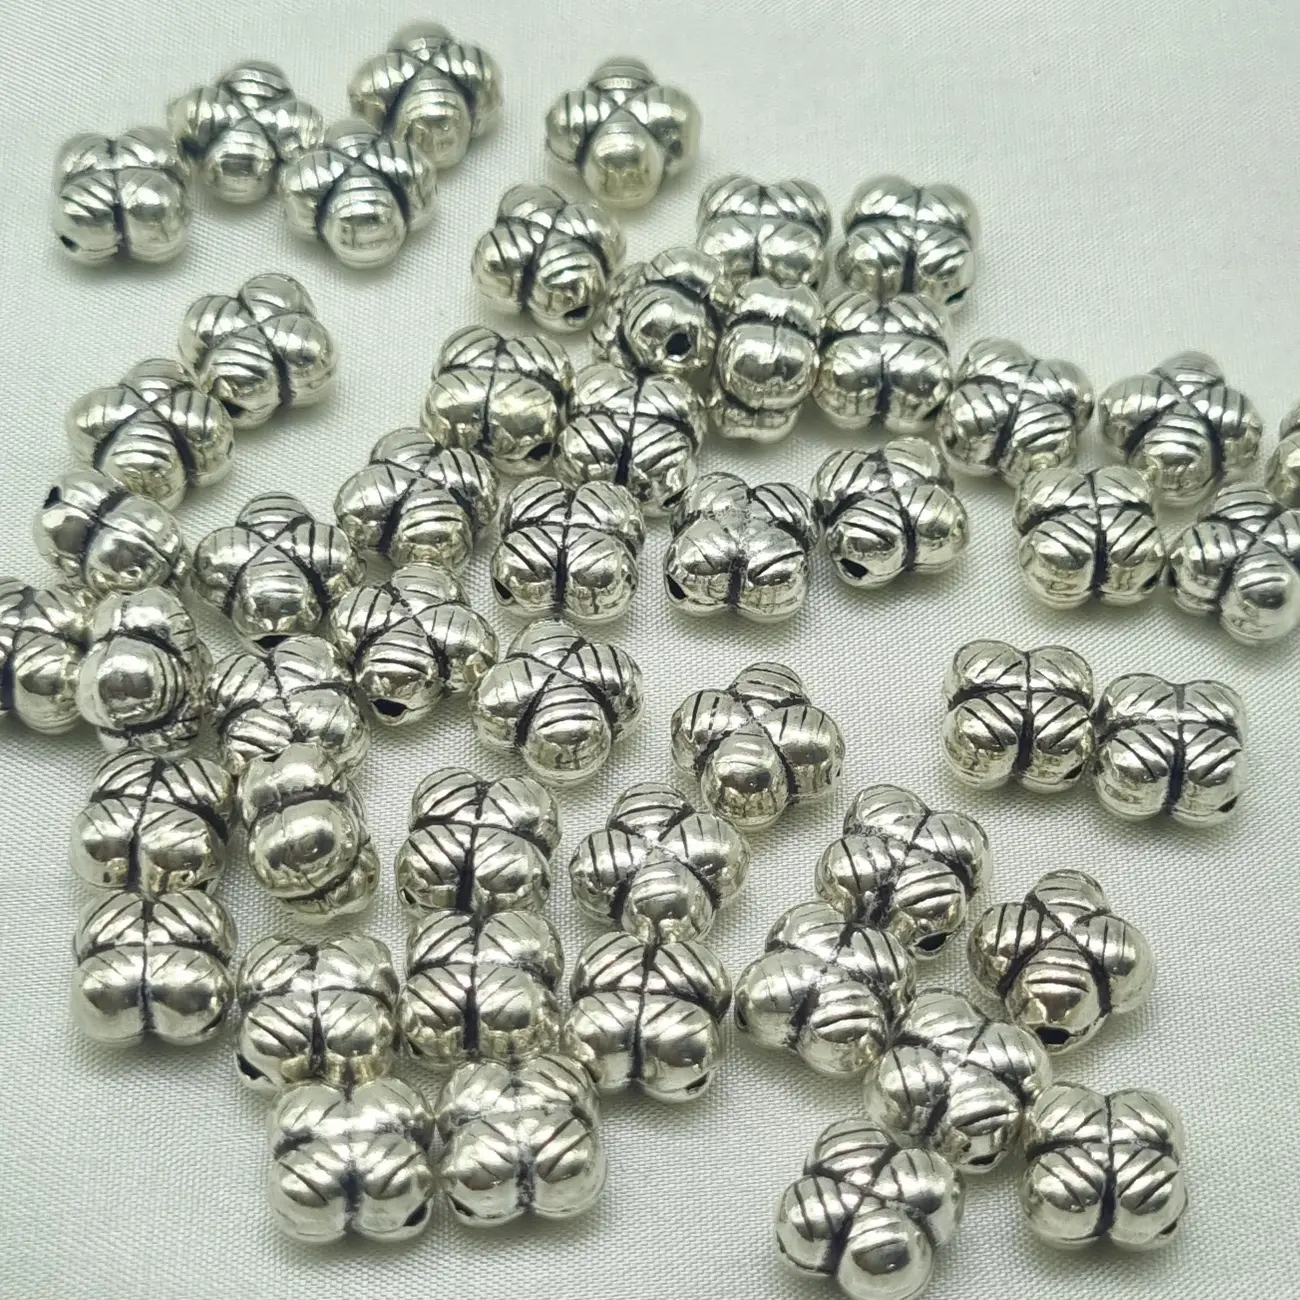 Sterling Silver Beads 925 For Jewelry Making In Wholesale At Best Price For Designing, Bracelets, Charms, Gifts for Her